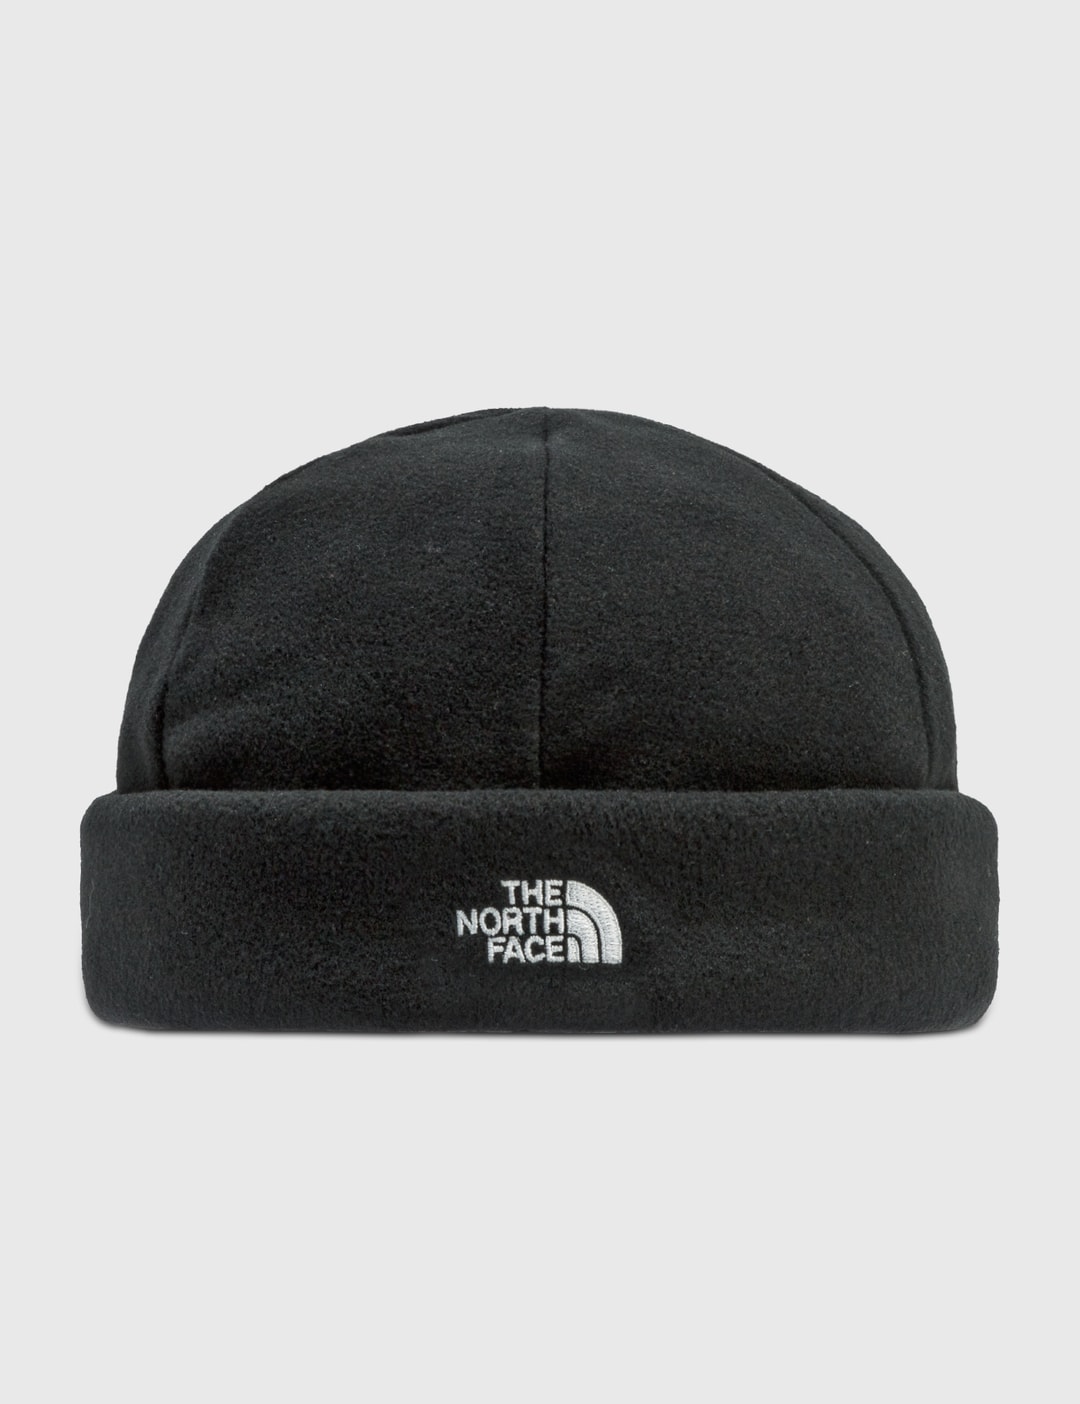 The North Face - Denali Beanie | HBX - Globally Curated Fashion and ...